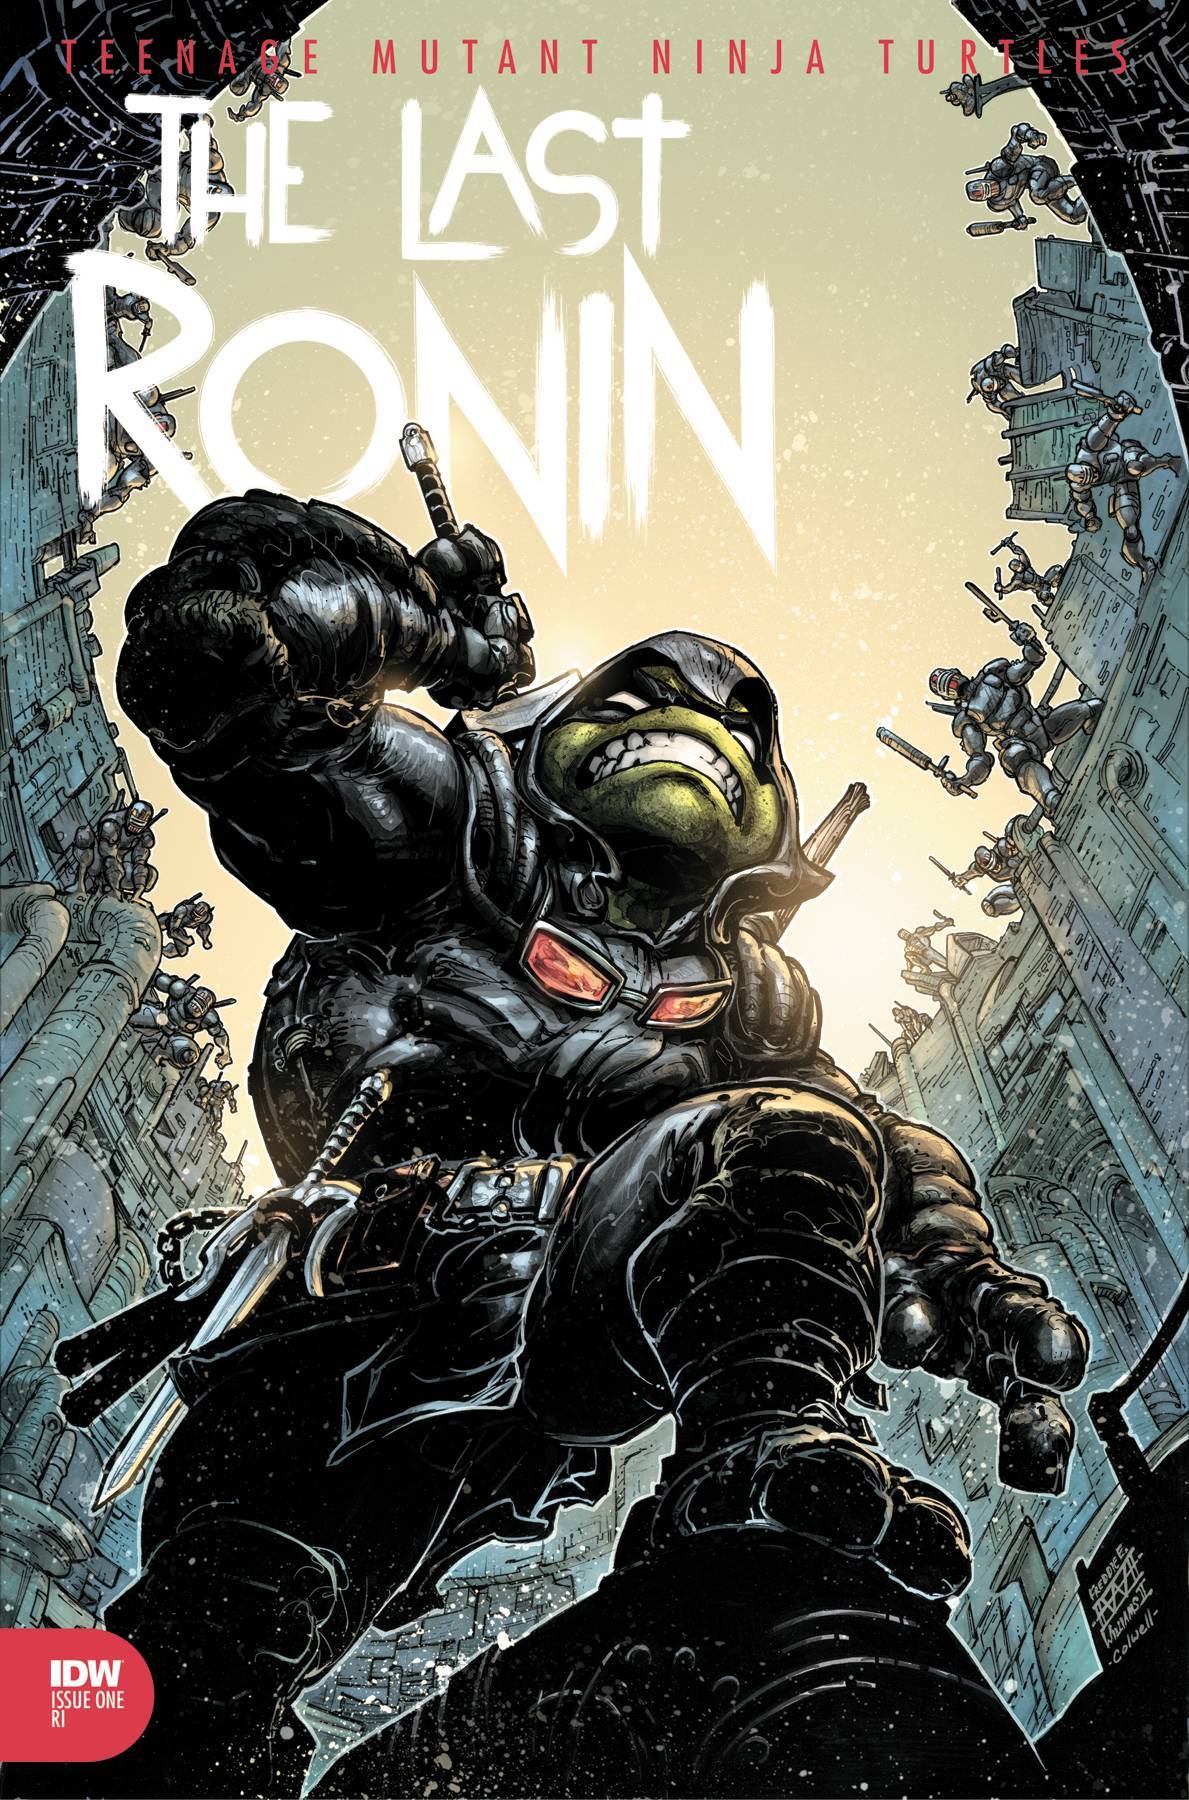 The One Stop Shop Comics & Games Tmnt The Last Ronin #3 (Of 5) 10 Copy Incv Freddie Williams (5/26/2021) IDW PUBLISHING